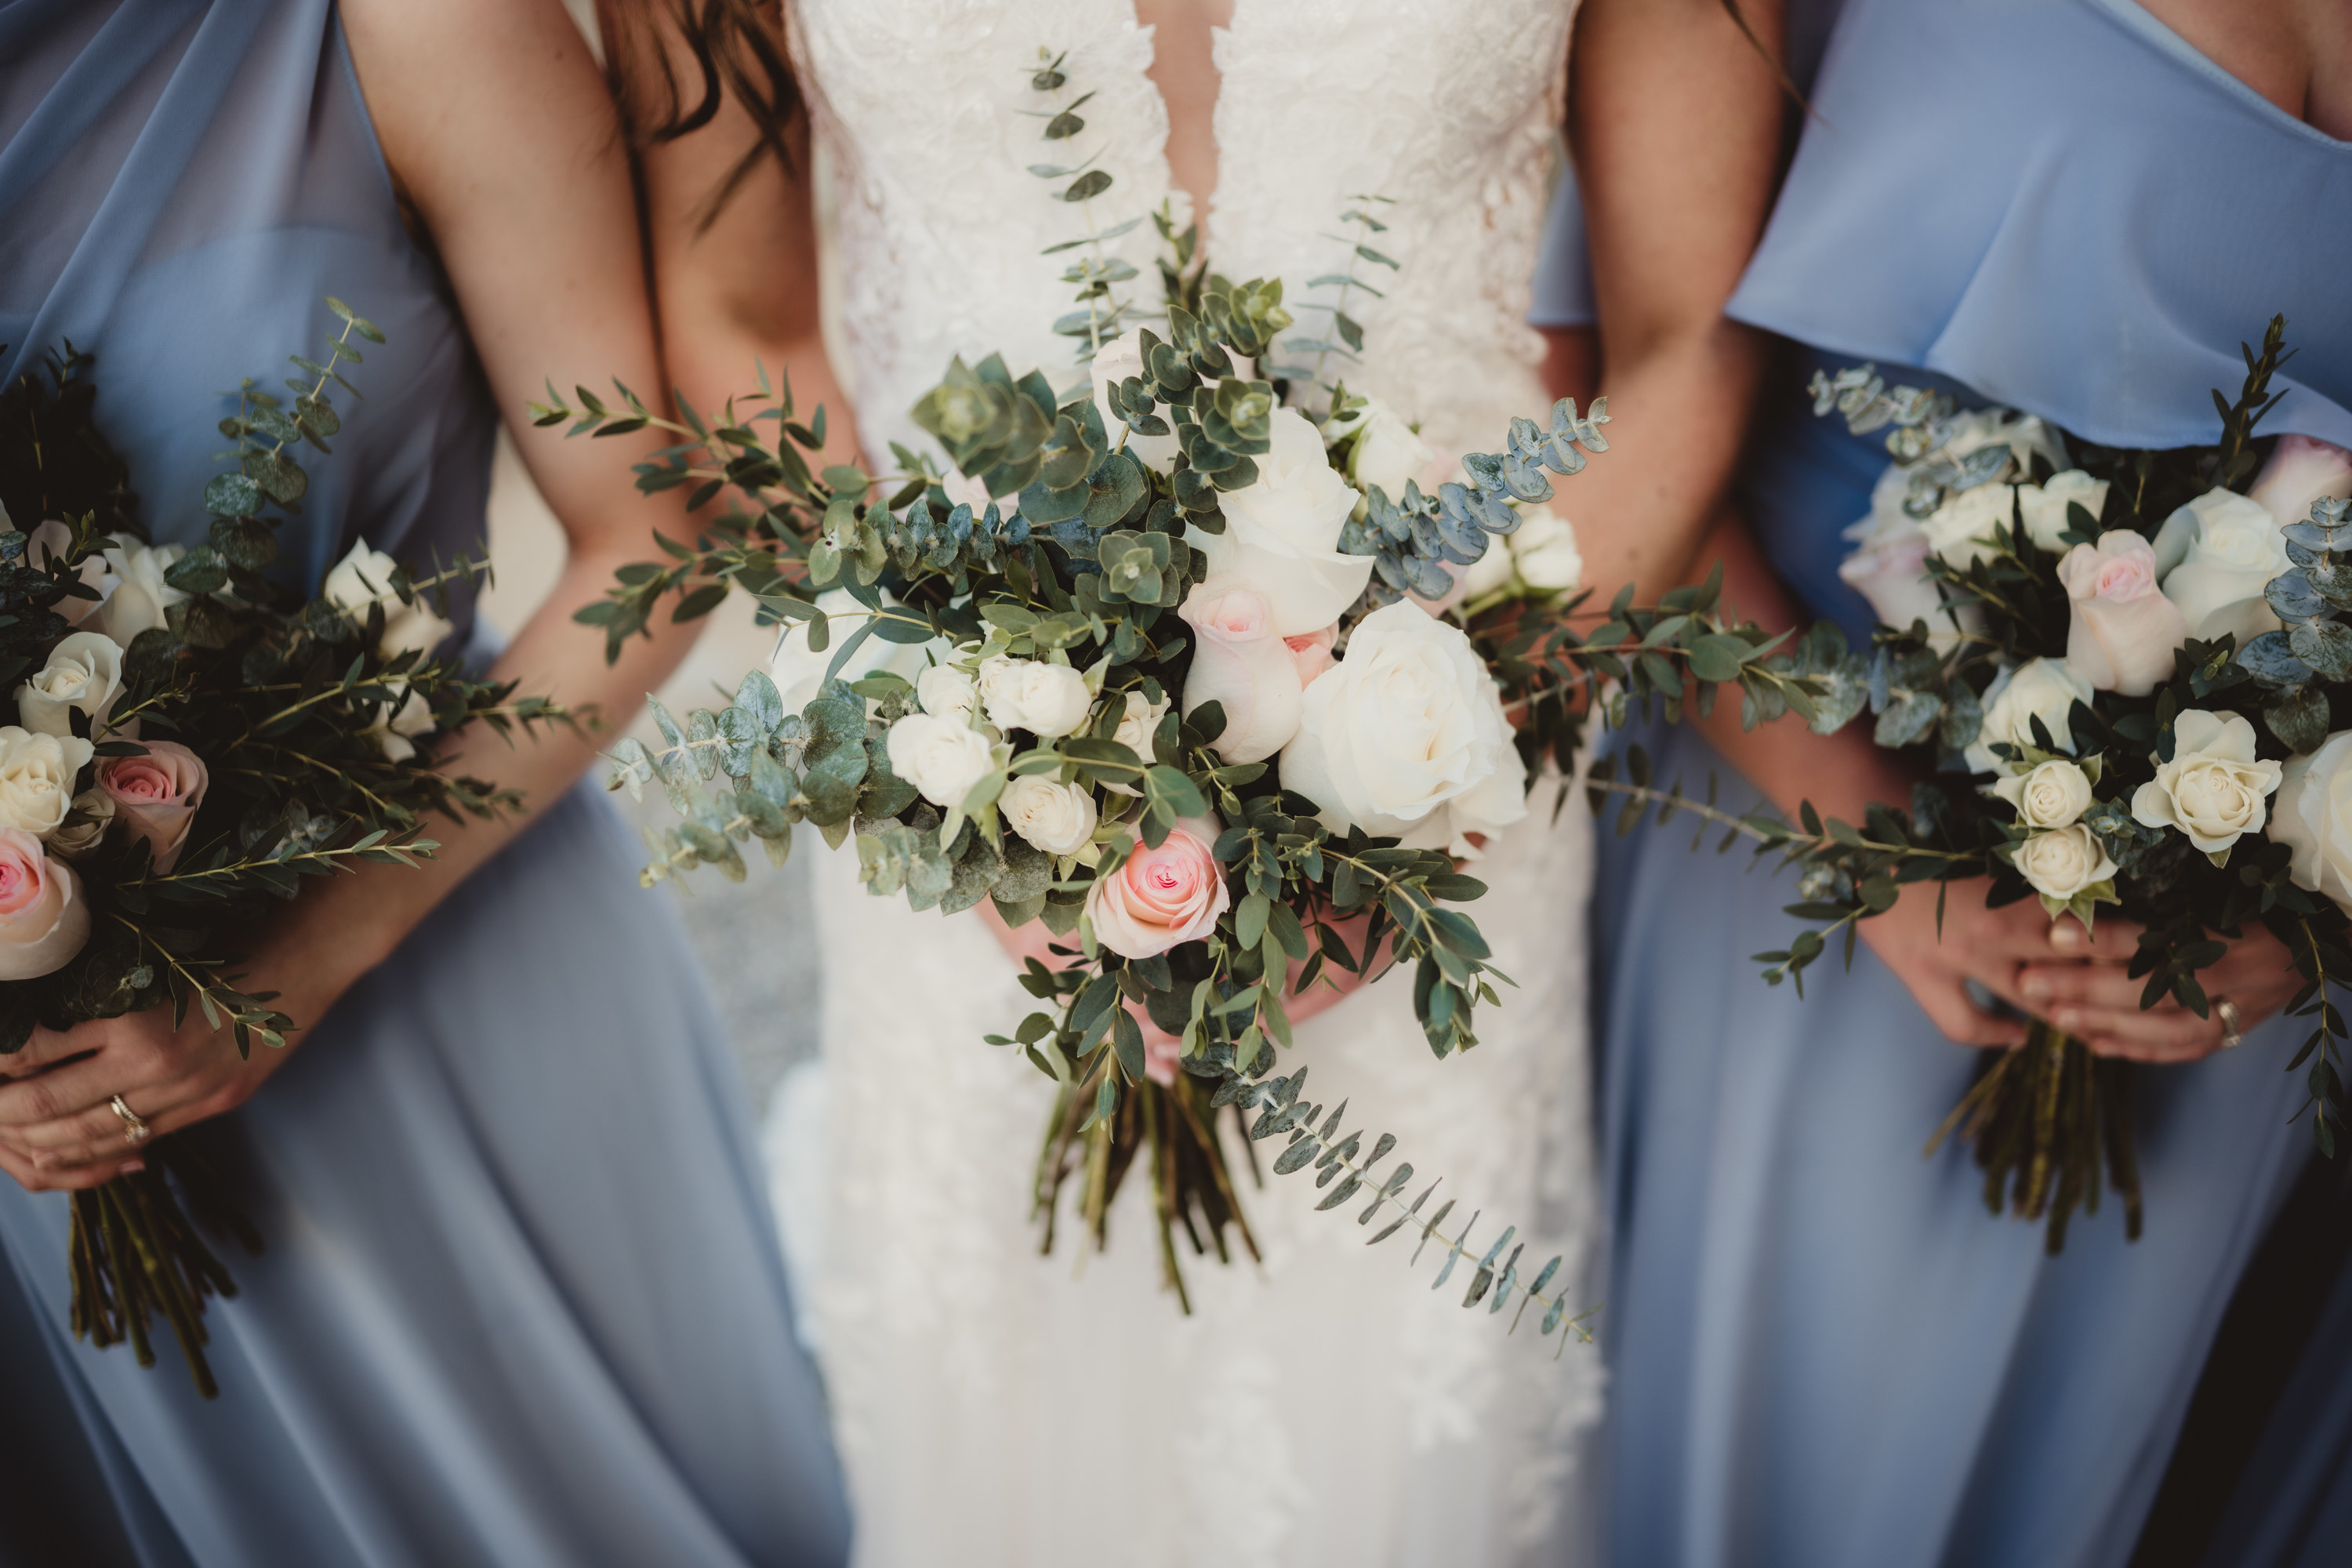 A bride and bridesmaids holding bouquets